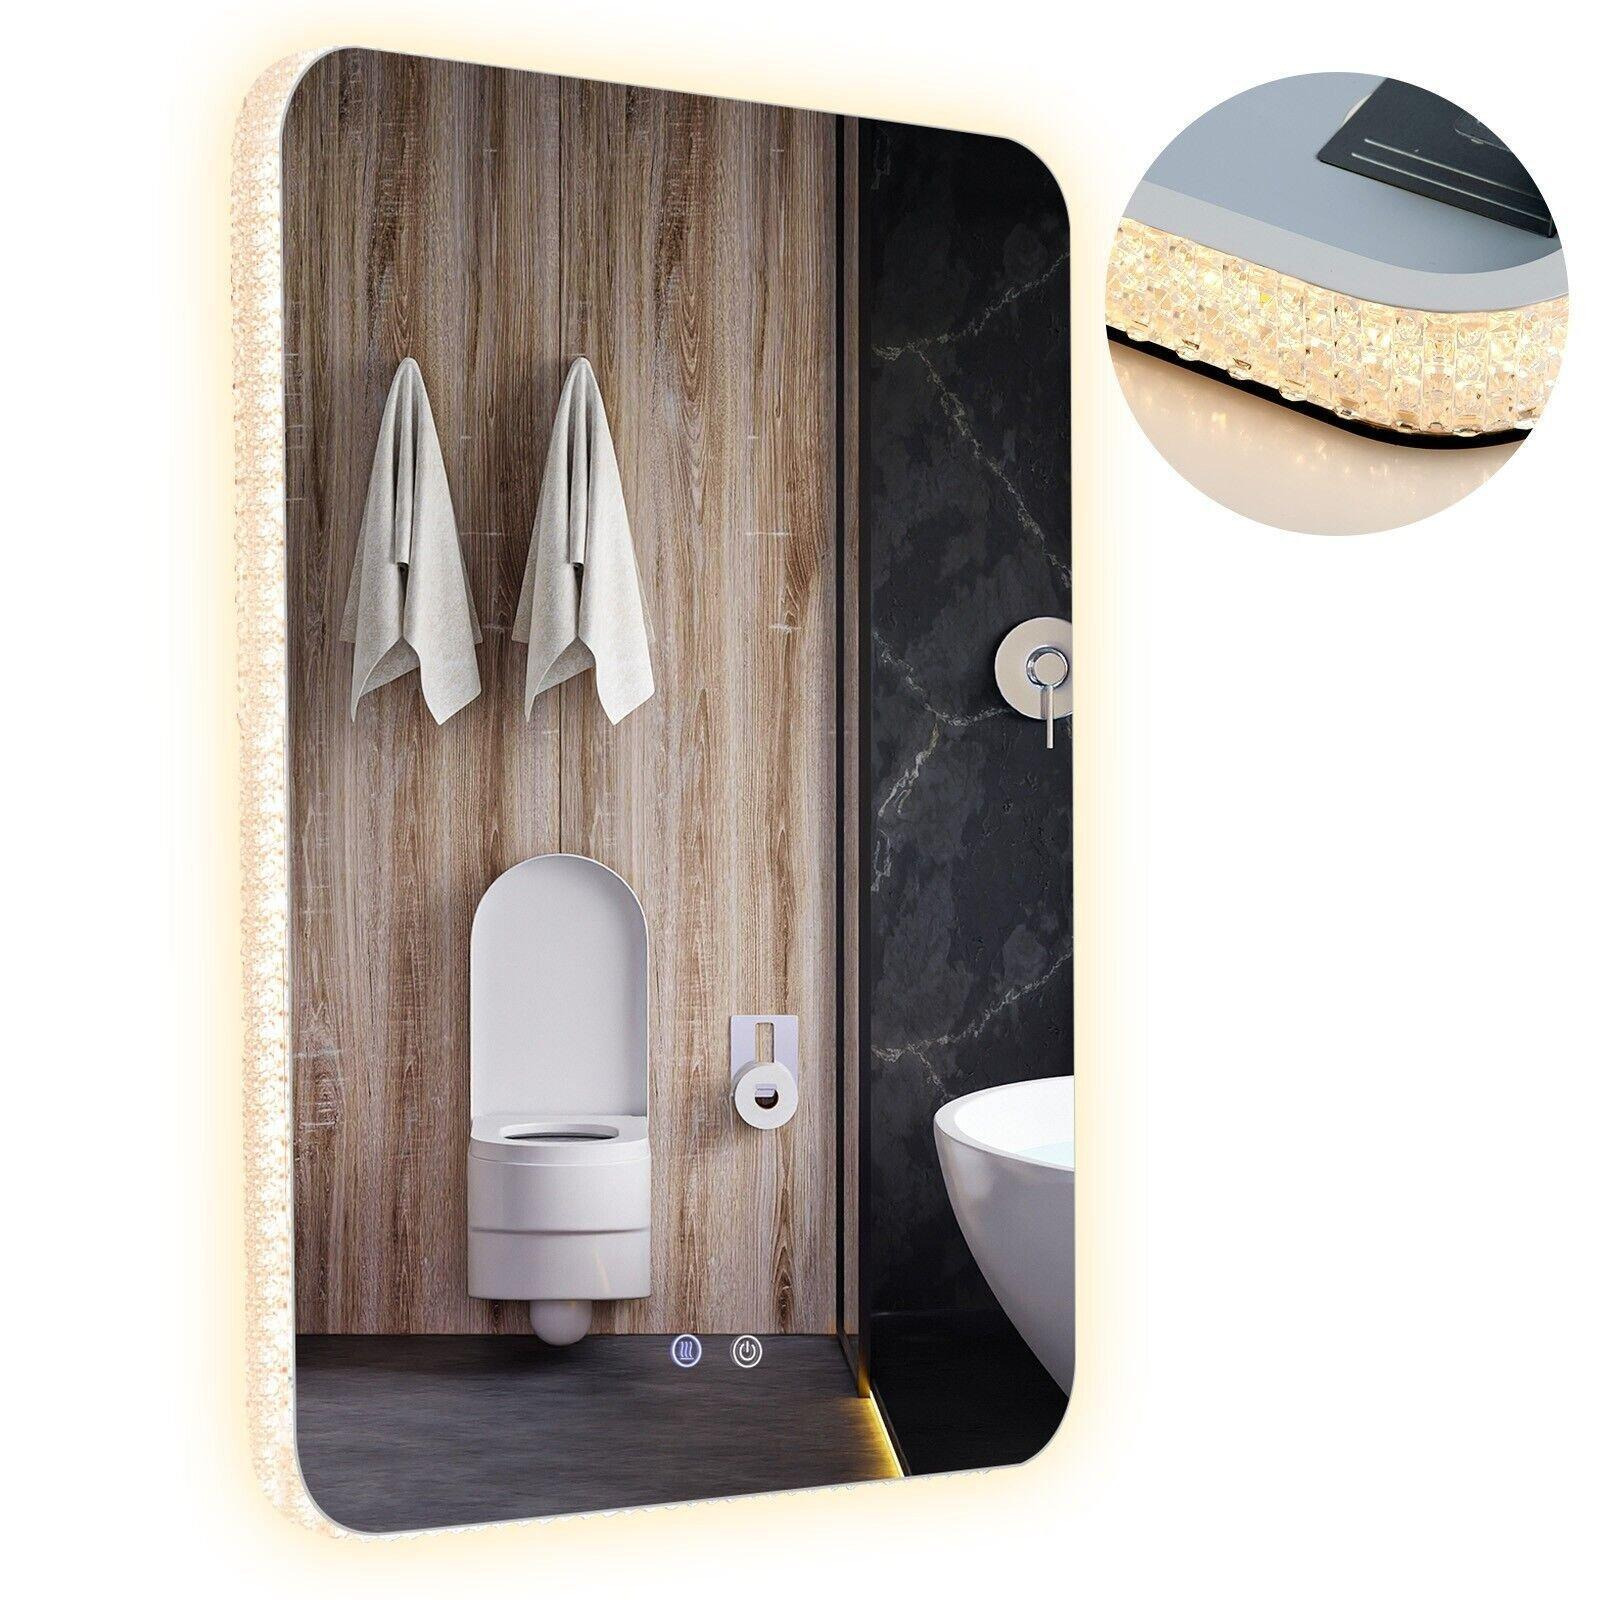 Shatterproof Wall Mounted Mirror Bathroom Mirror with LED Lights - image 1